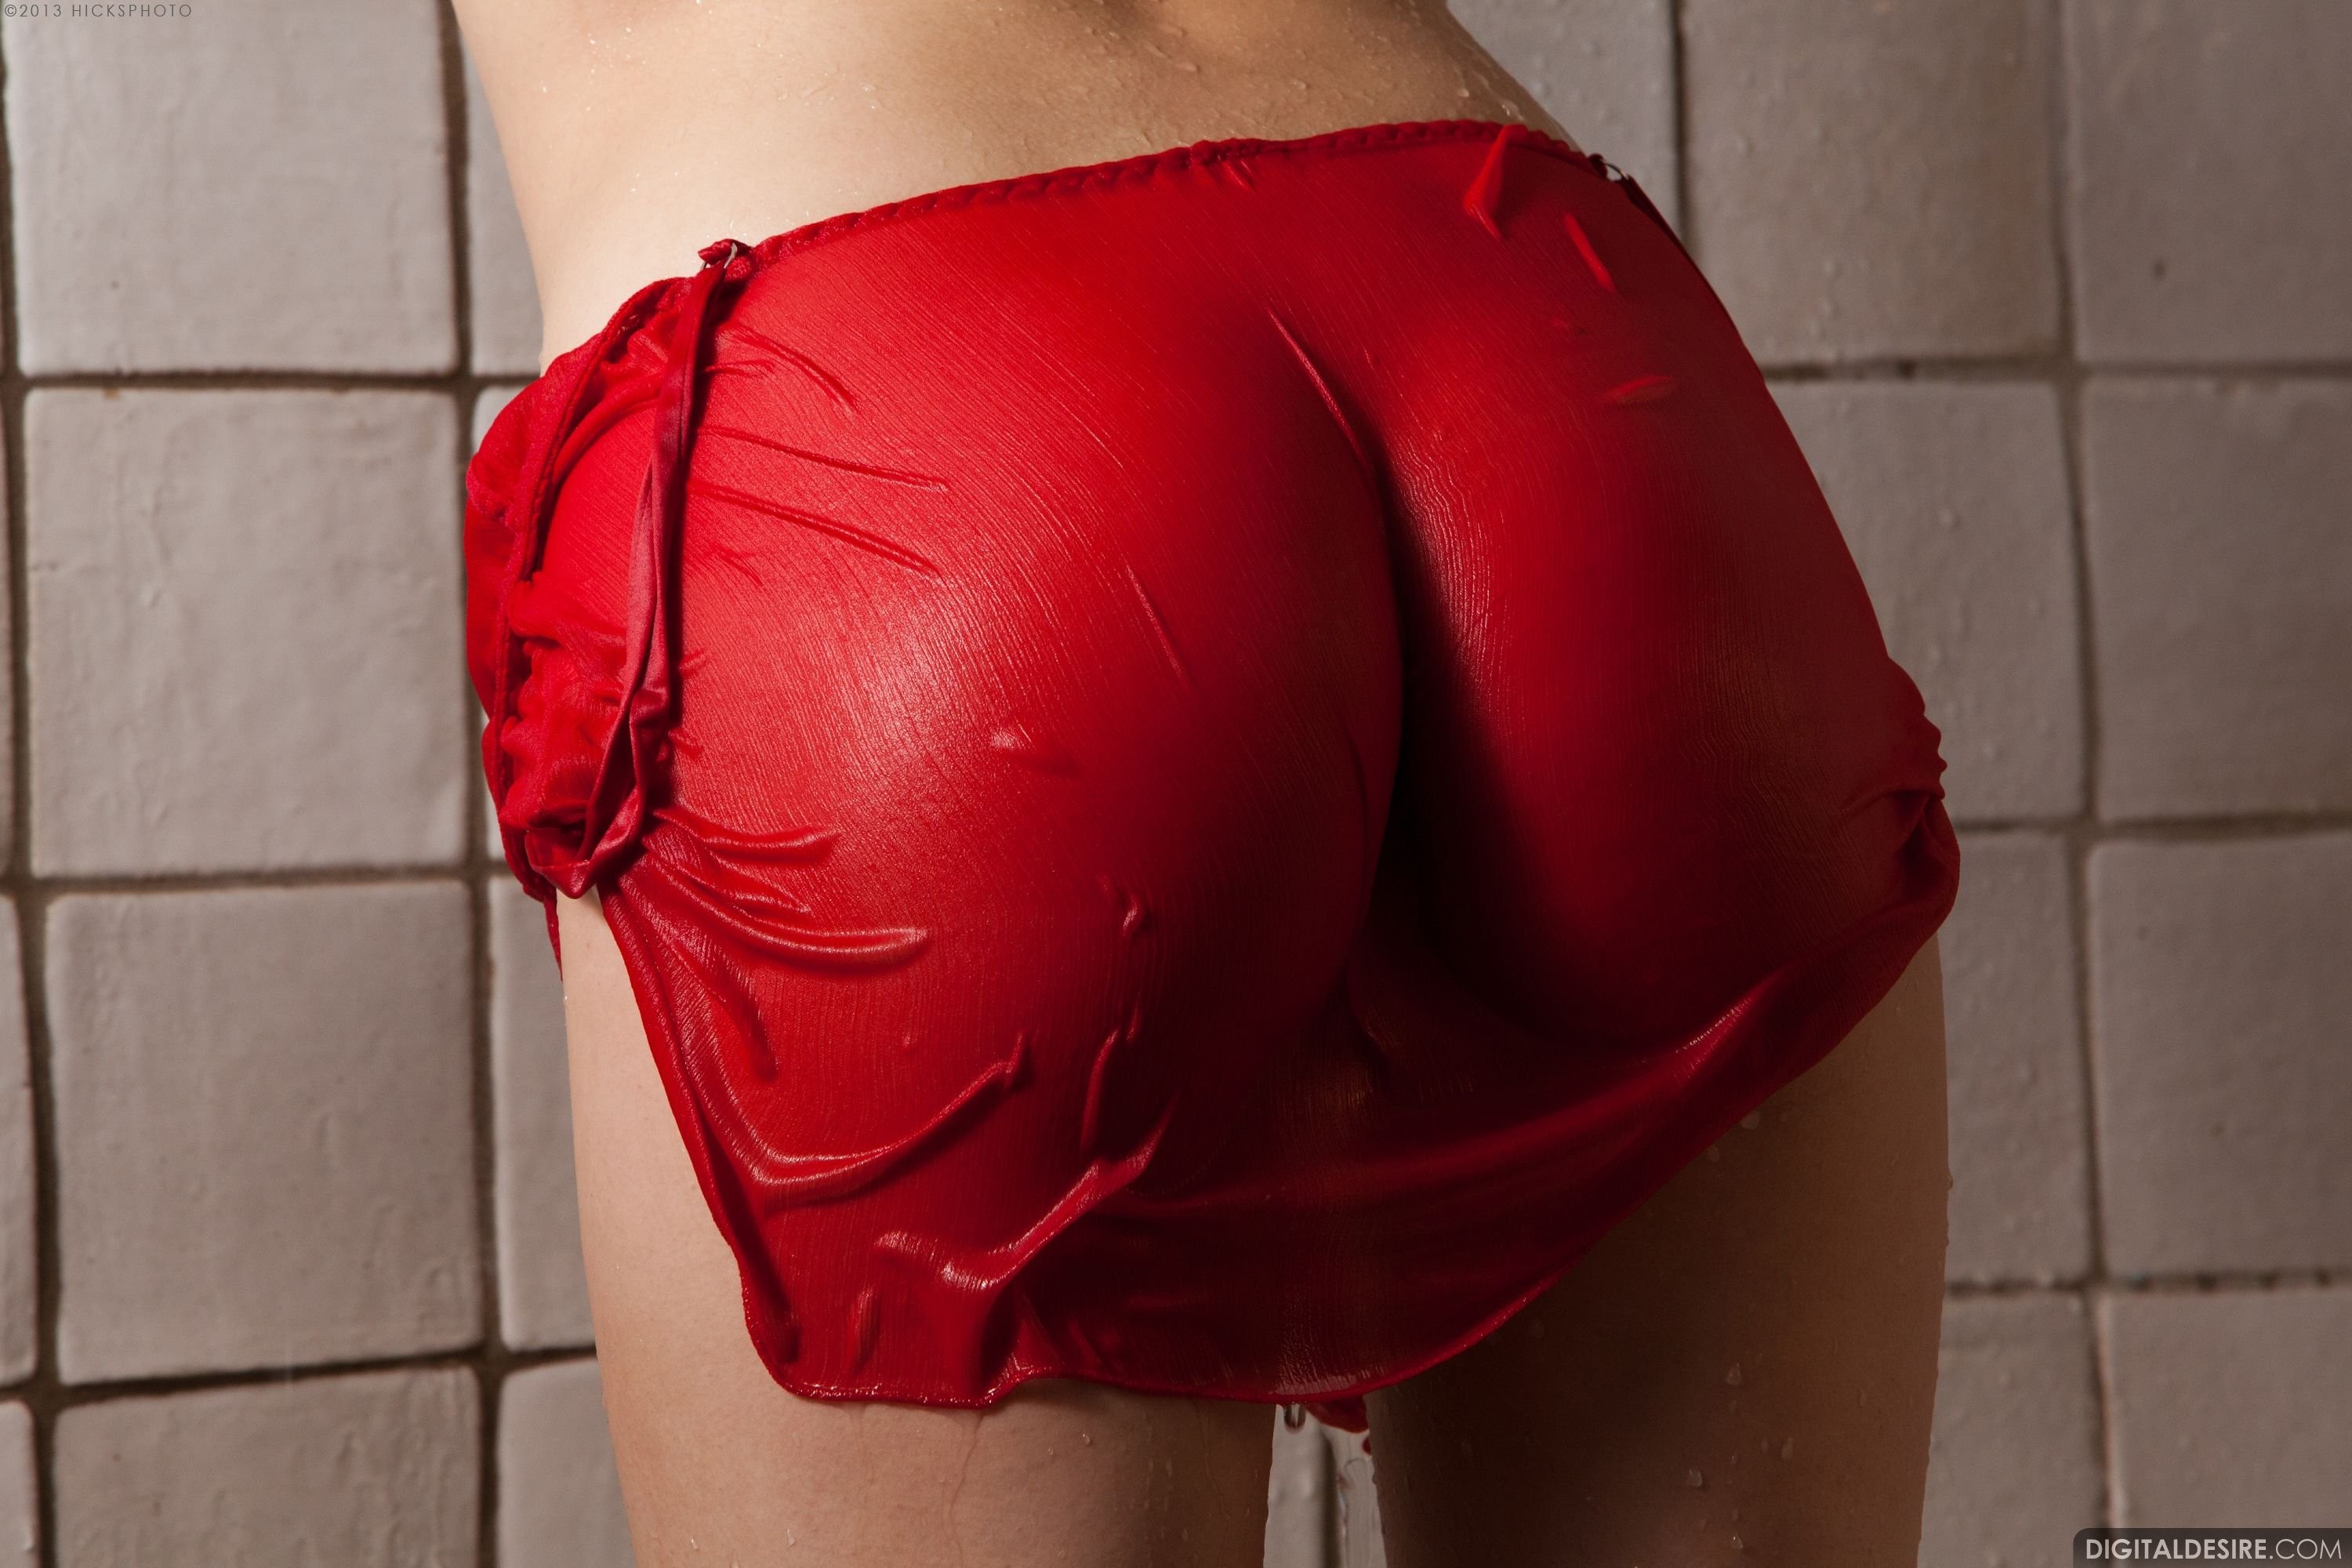 People 3000x2000 wet clothing ass women Digital Desire model red clothing closeup rear view tiled wall shower women indoors